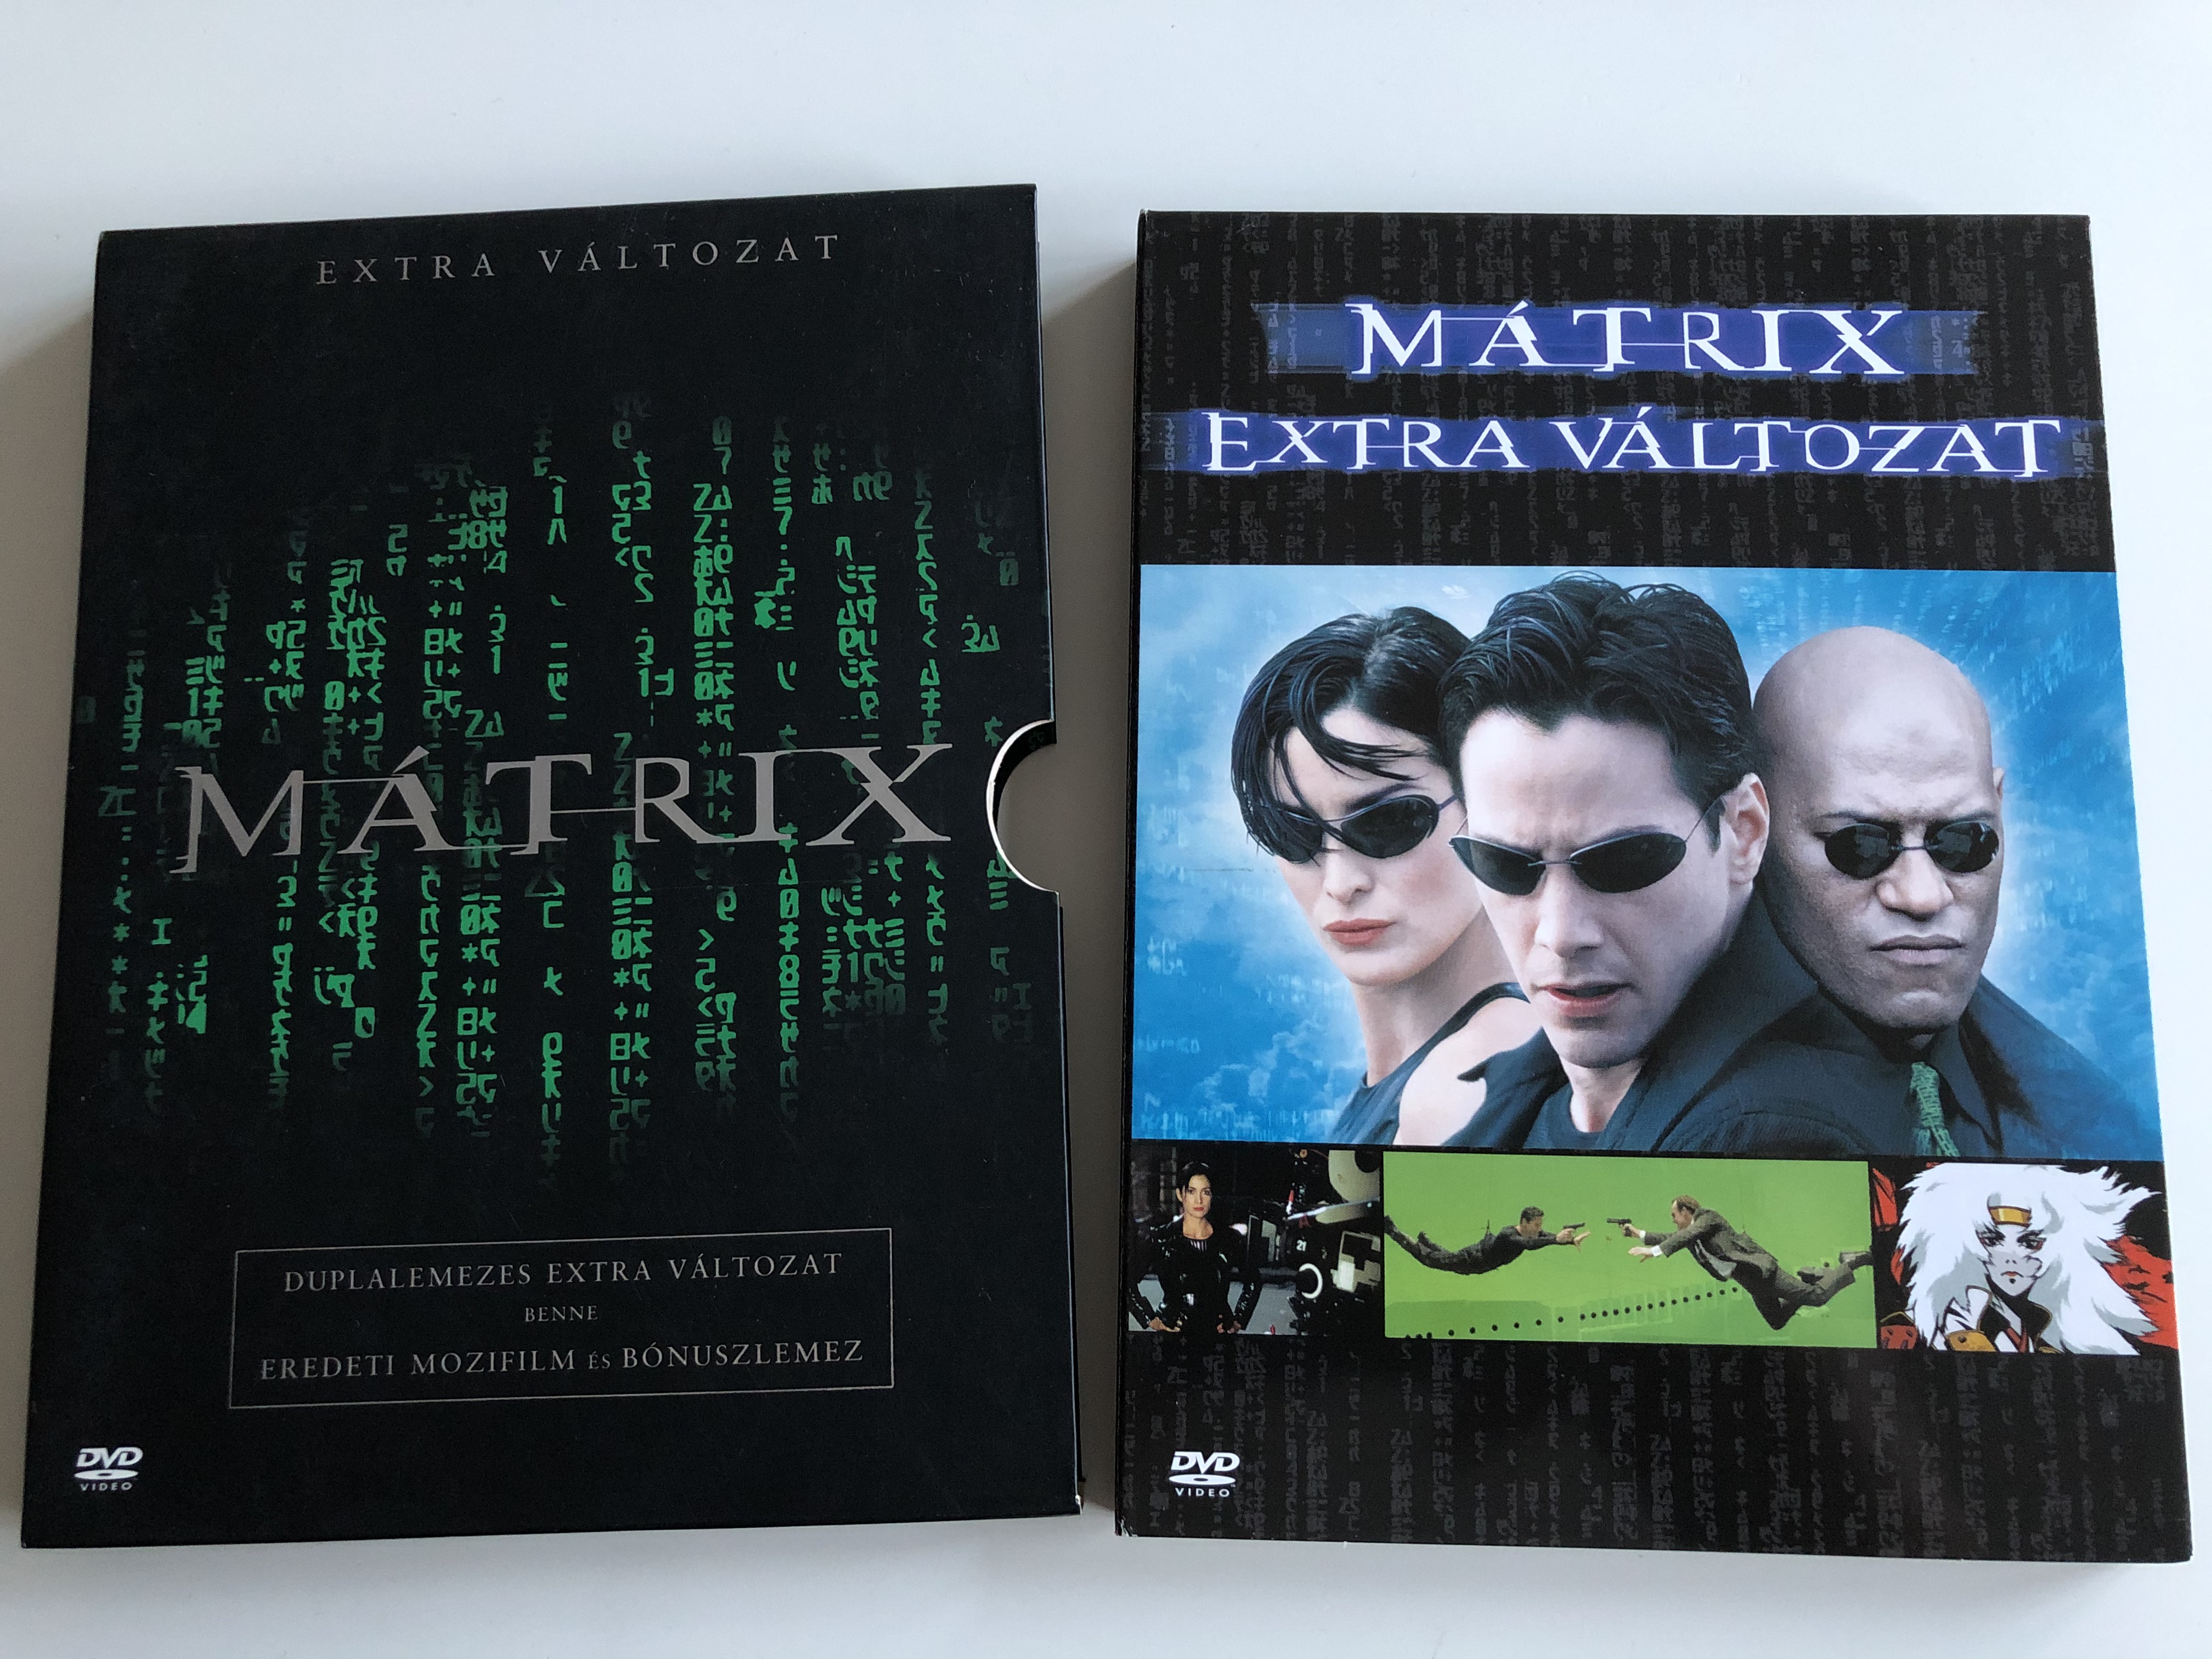 -the-matrix-special-edition-2dvd-1999-m-trix-extra-v-ltozat-directed-by-the-wachowskis-starring-keanu-reeves-laurence-fishbourne-carrie-anne-moss-5-.jpg